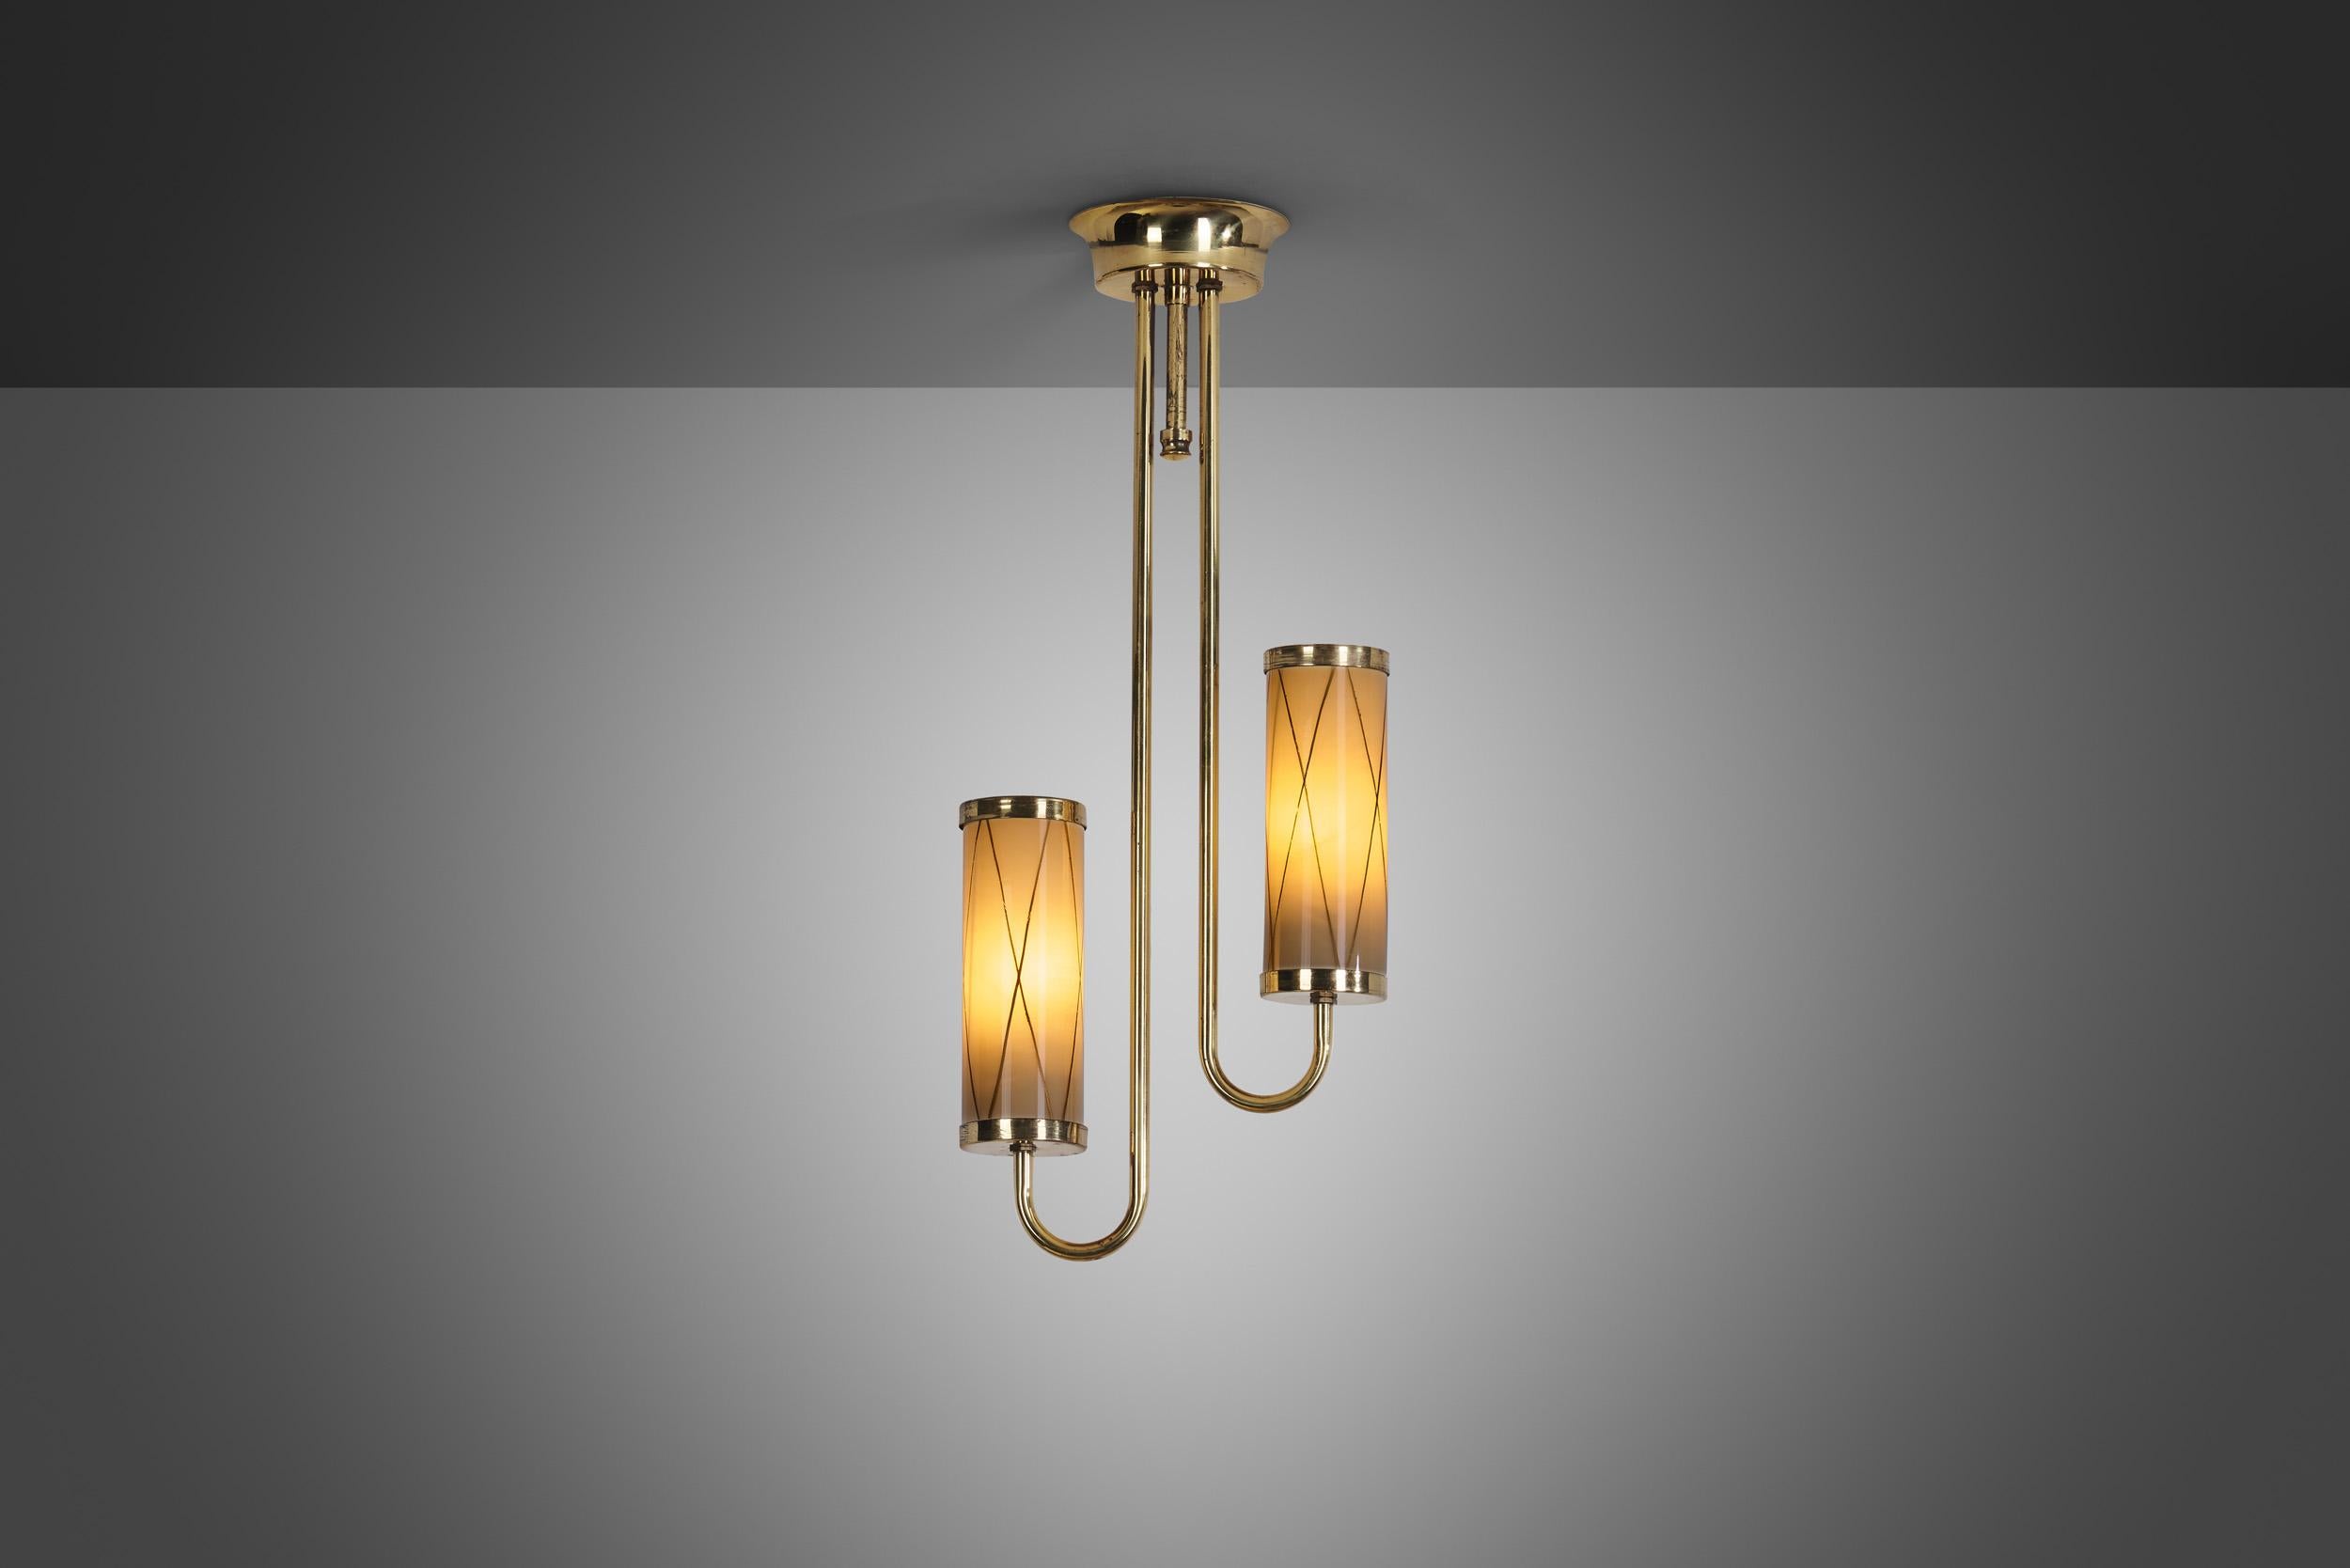 European Brass Ceiling Lamp with Decorative Cylindrical Glass Shades, Europe Ca 1950s For Sale